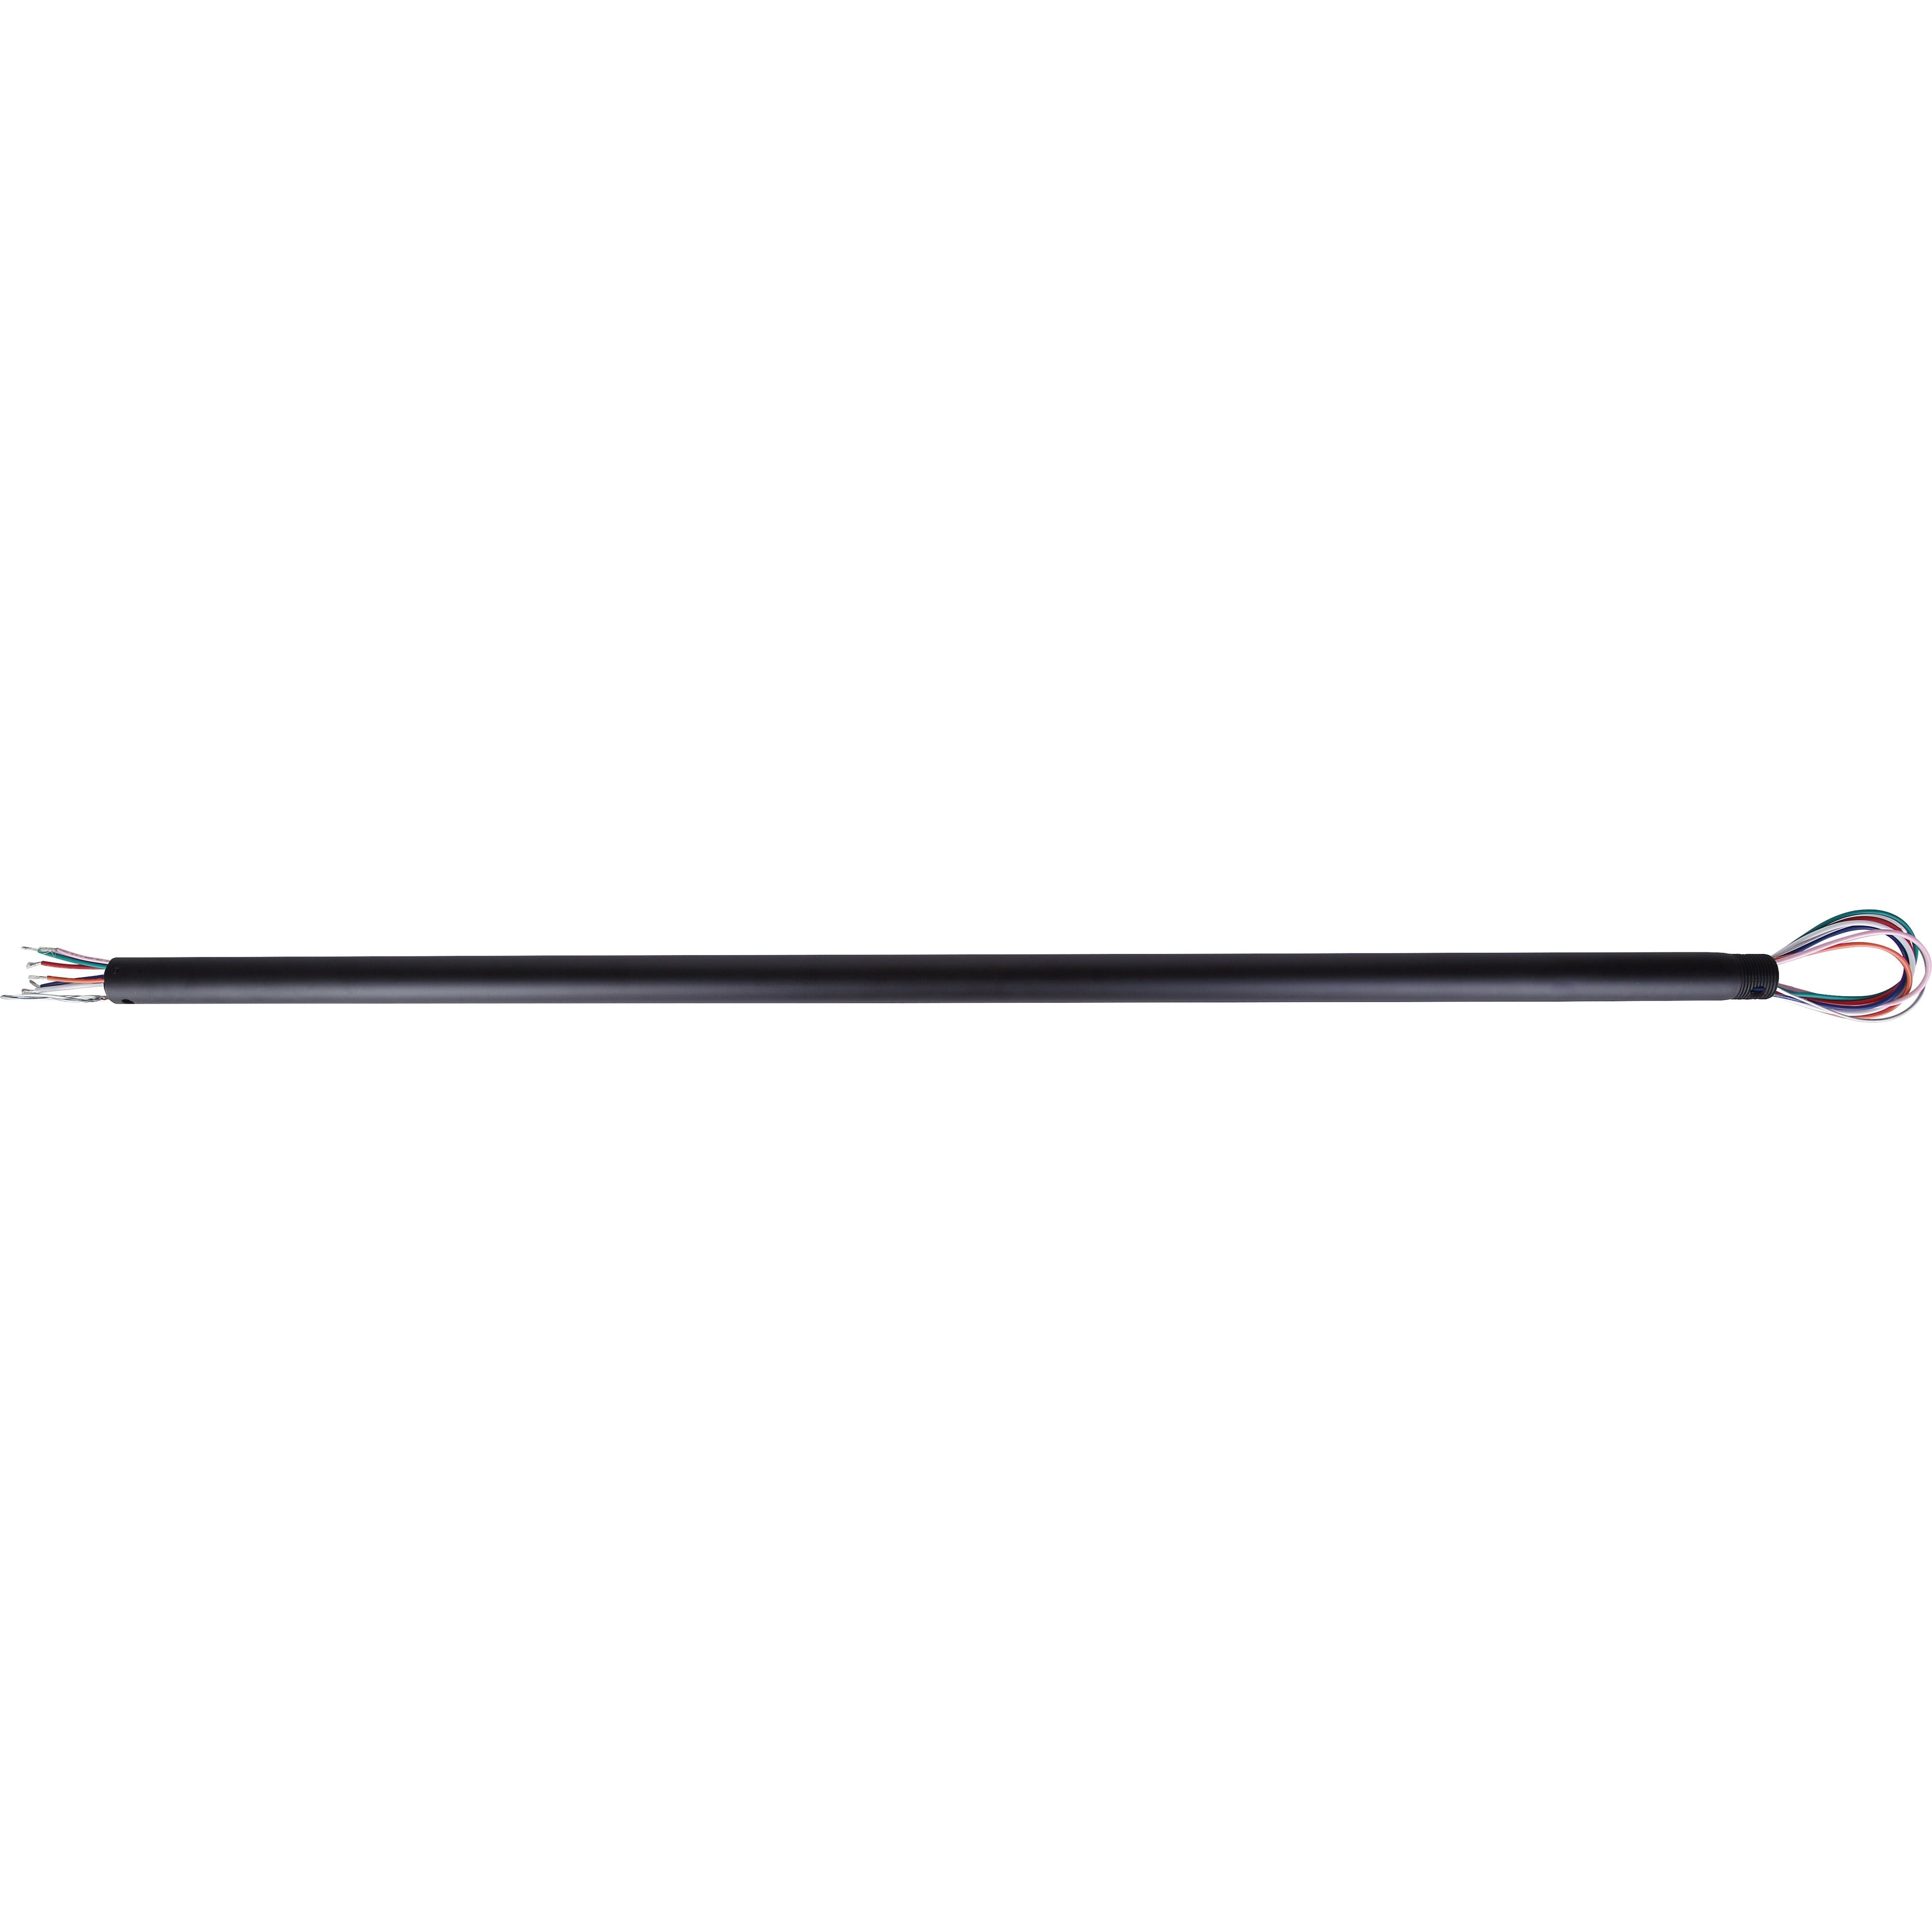 36" Replacement Downrod for DC Motor Fans